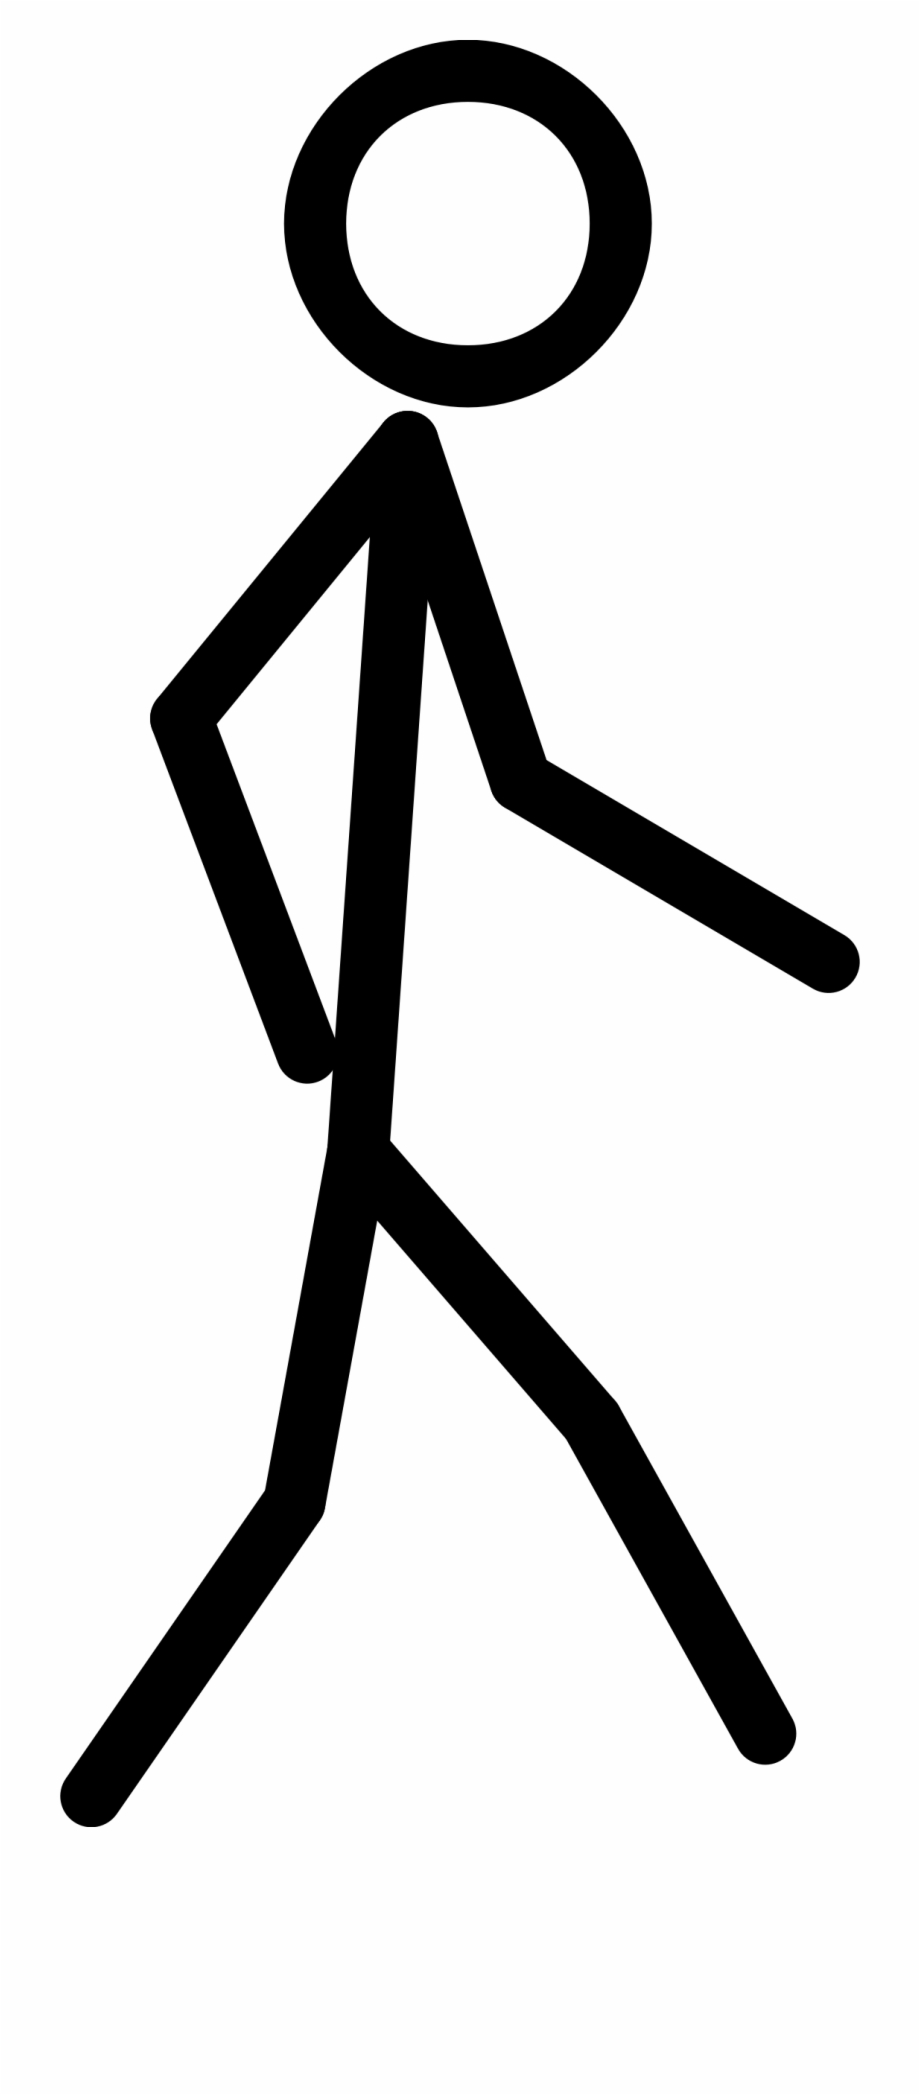 Free Stick Figure Png, Download Free Stick Figure Png png images, Free ...